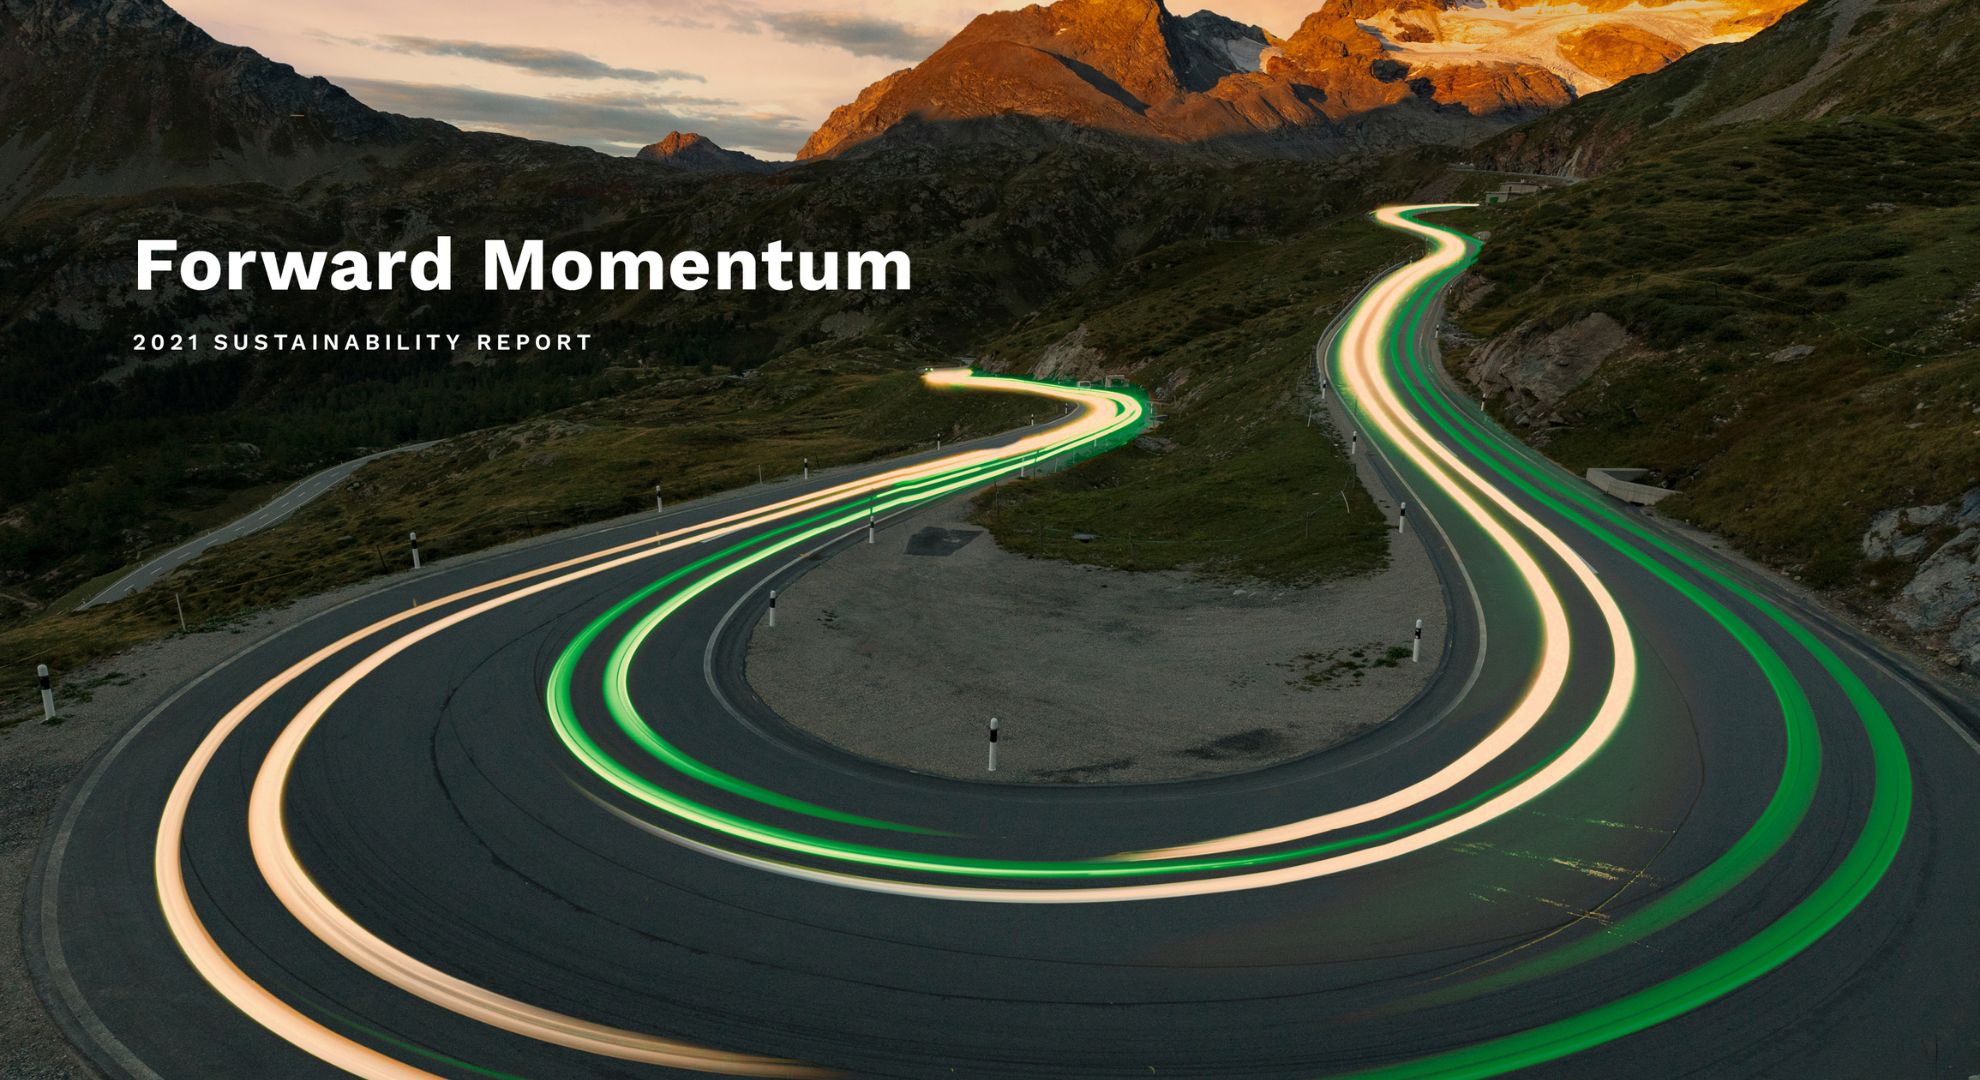 A winding road at sunset features green and yellowish streaks of light, implying cars driving quickly by. Overlaid is the text Forward Momentum: 2021 Sustainability Report